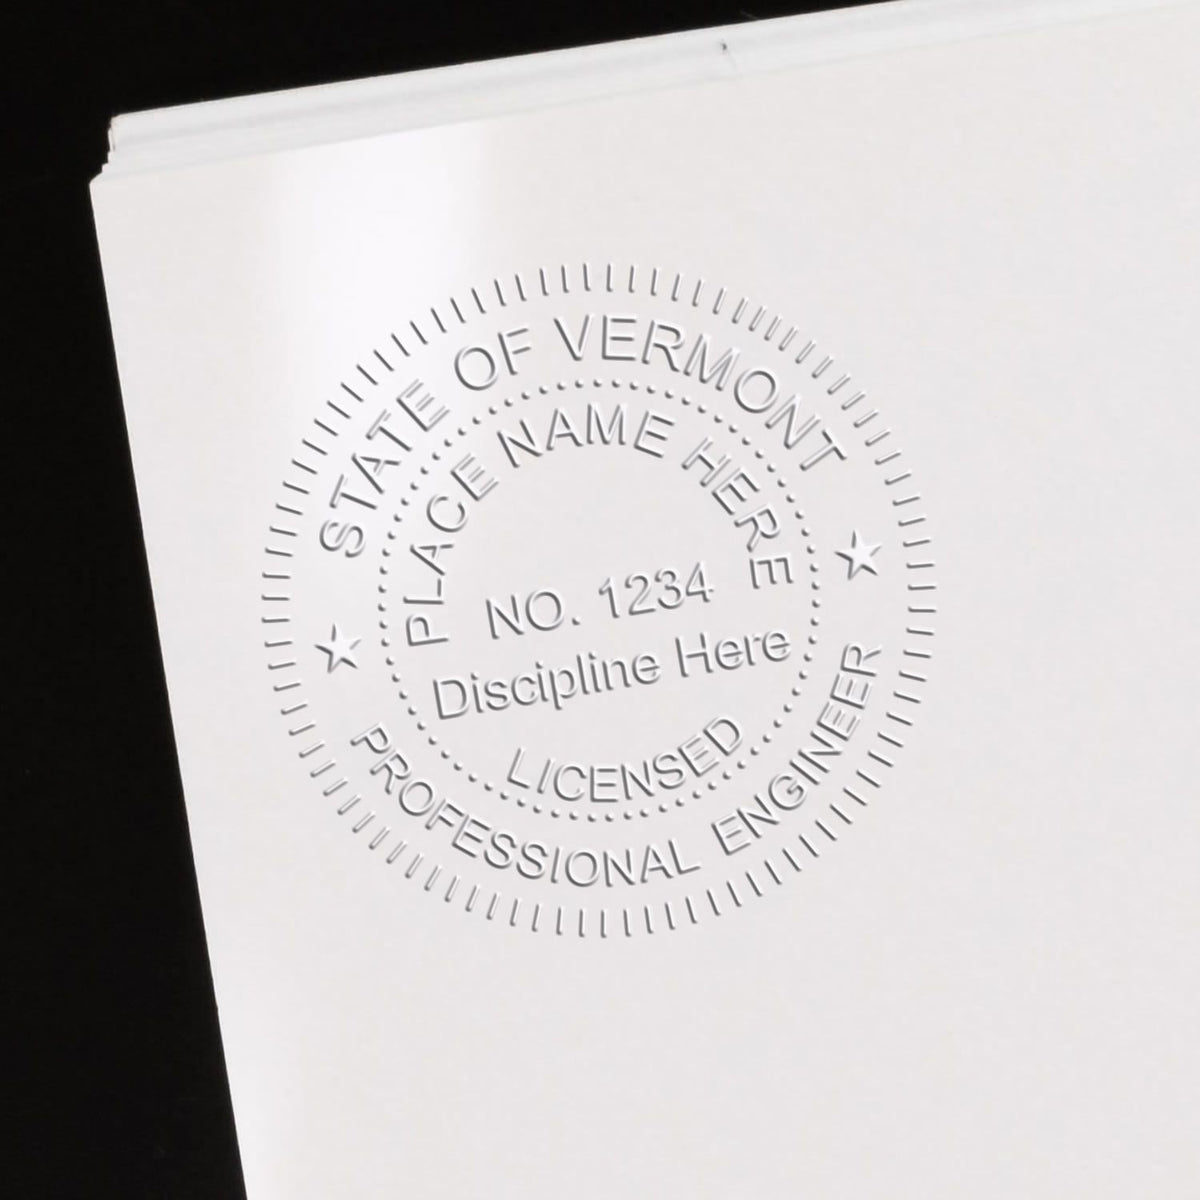 A photograph of the Hybrid Vermont Engineer Seal stamp impression reveals a vivid, professional image of the on paper.